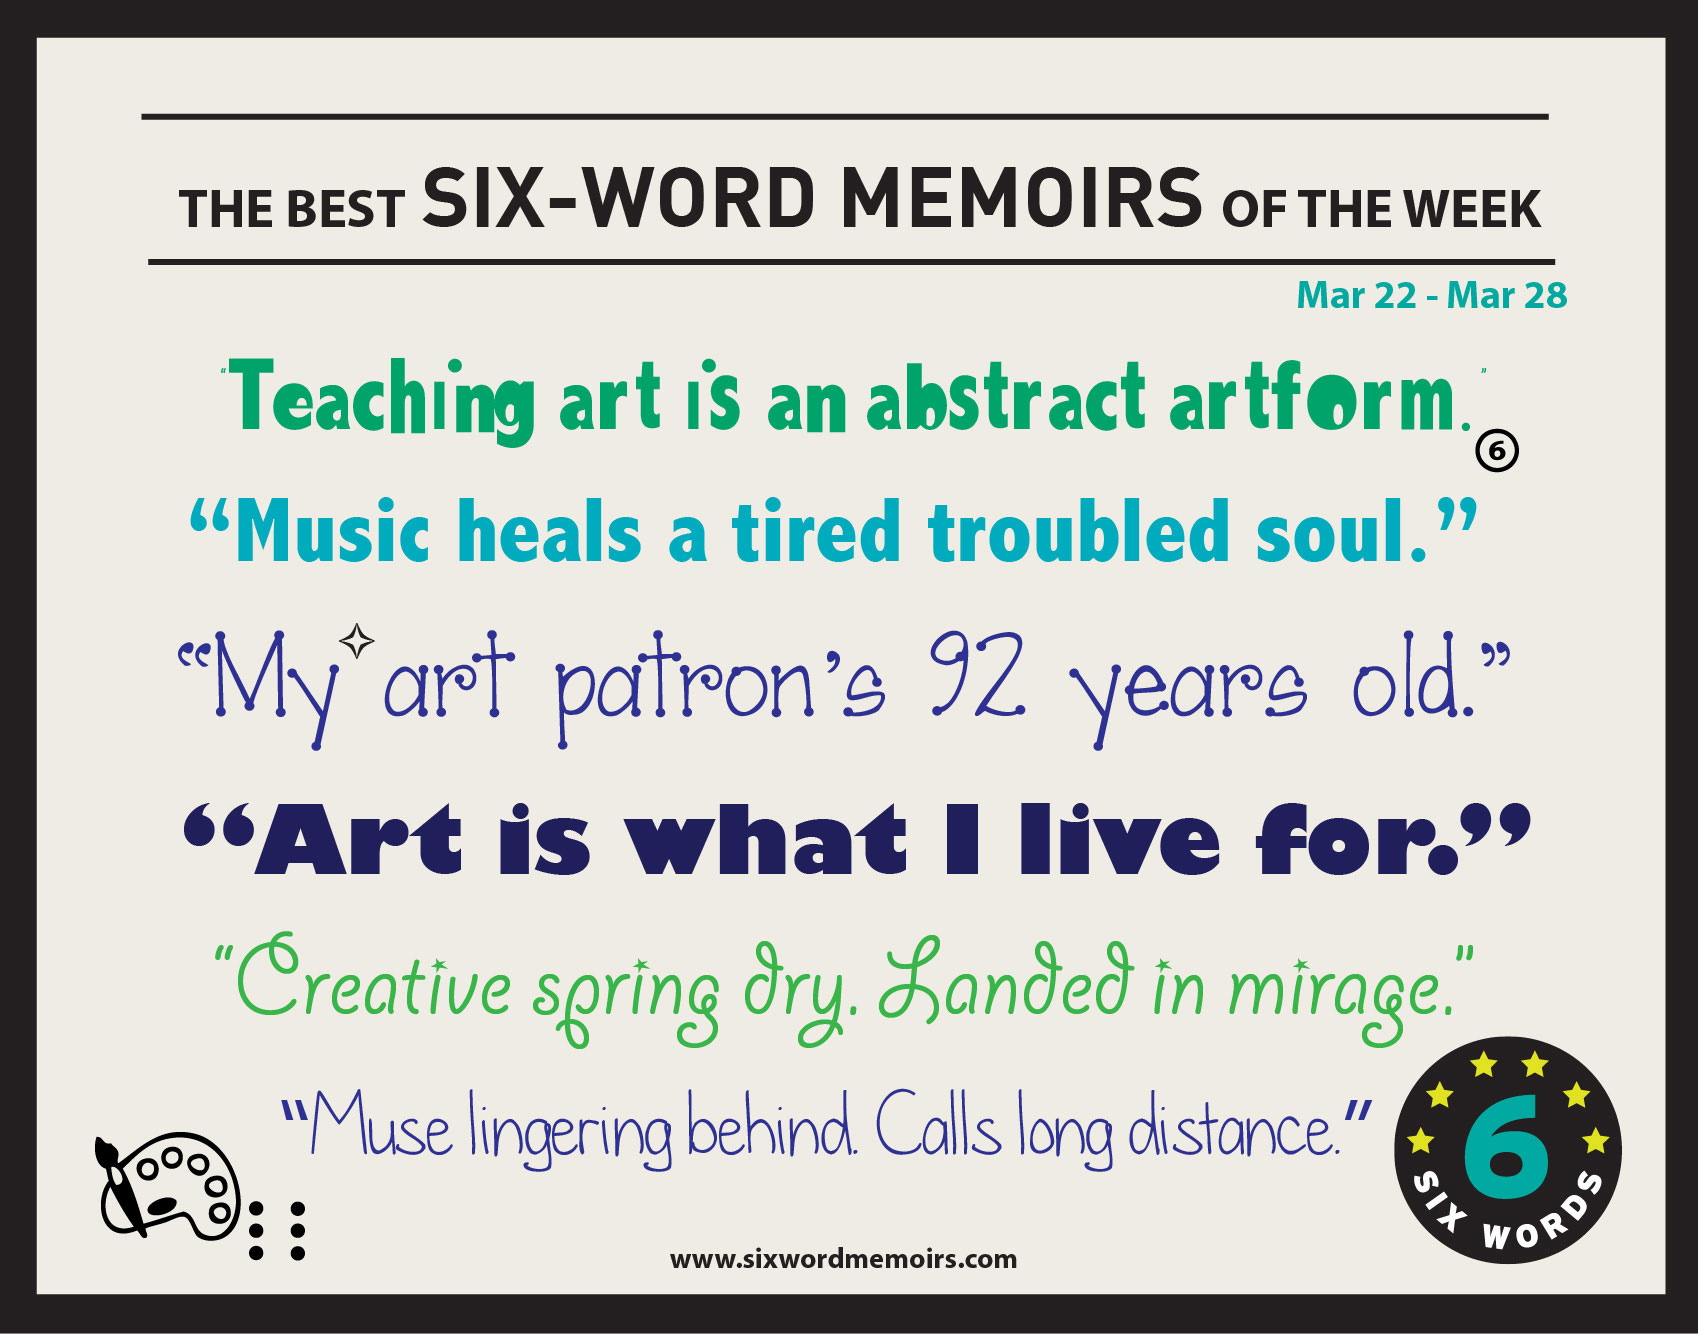 Art is what I live for.” The Best Six-Word Memoirs Of The Week